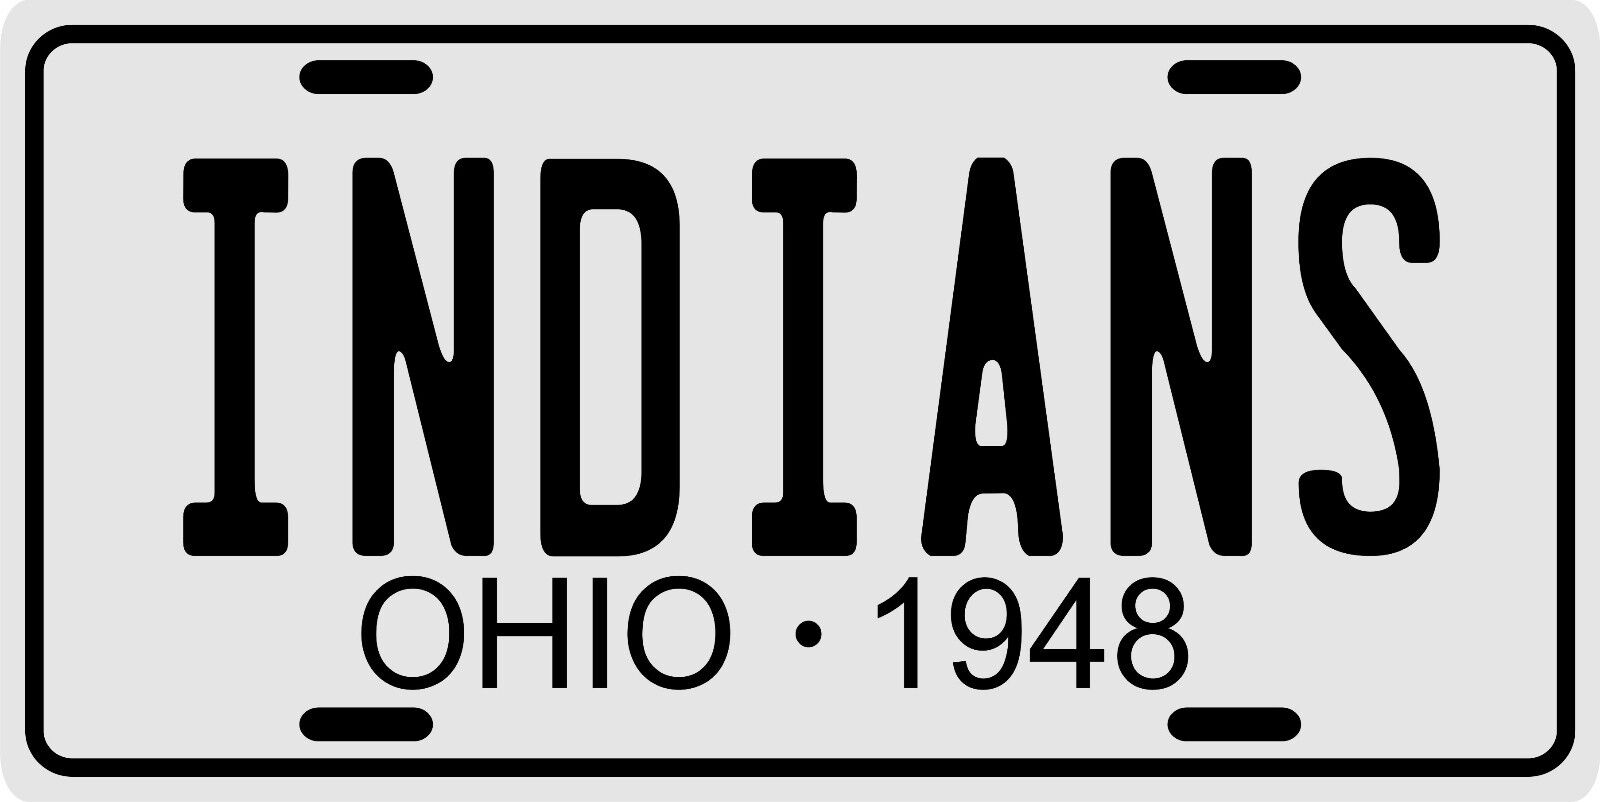 Cleveland Indians Baseball World Series Champions 1948 Ohio License plate